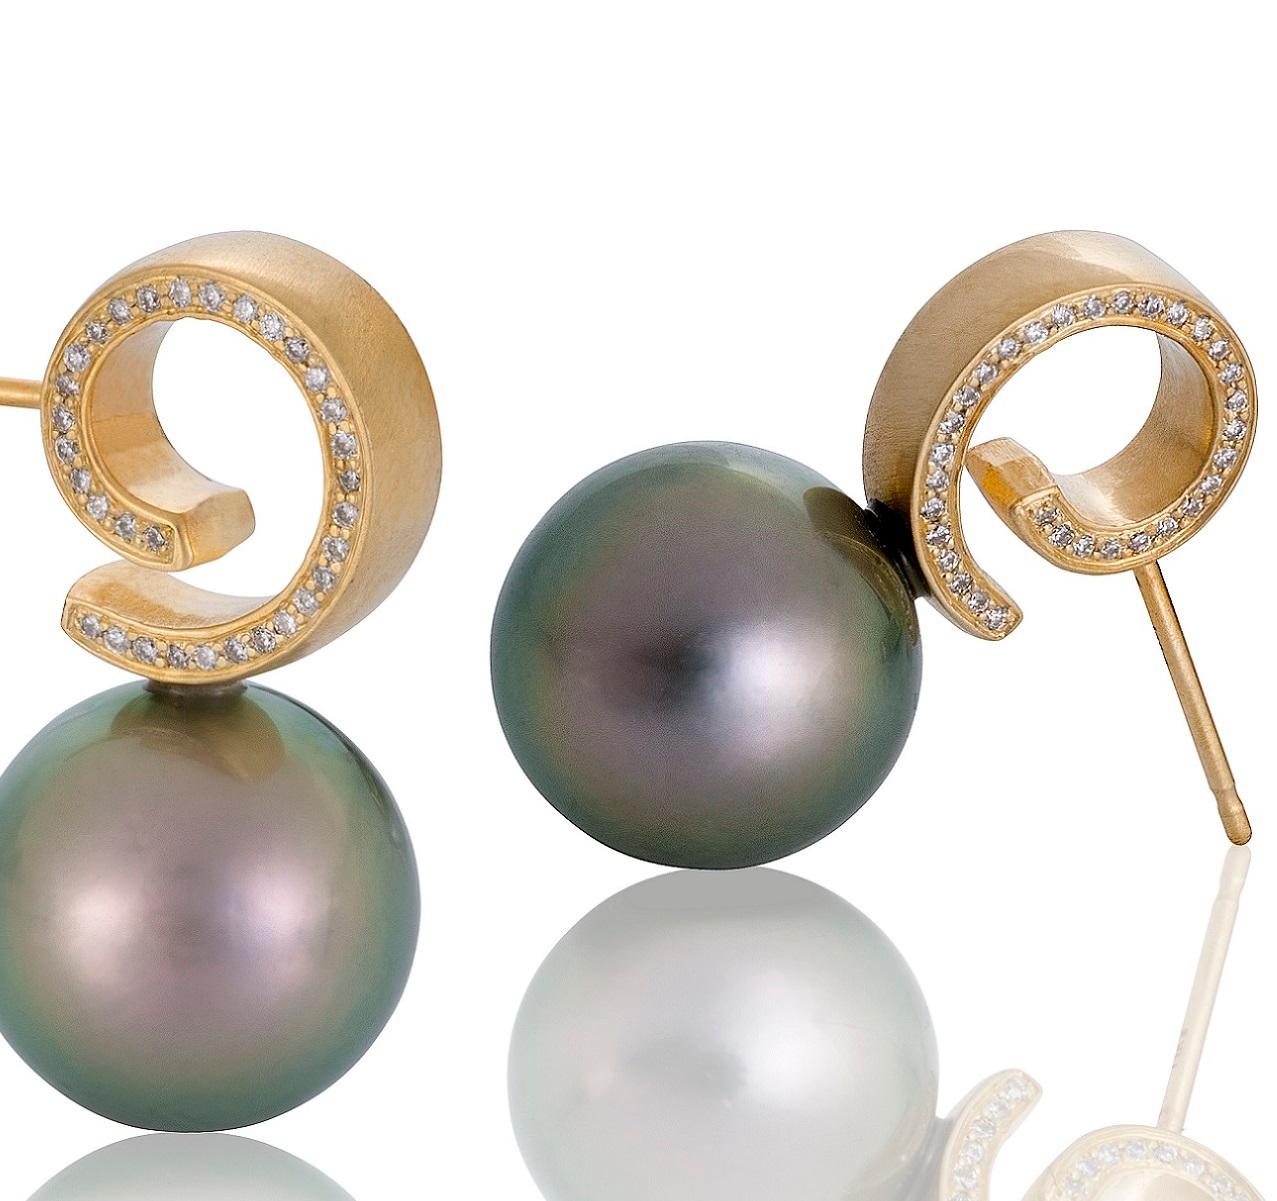 For the pearl lover out there - this pair of Cirrus Tahitian pearl earrings will make you swoon. The pearls are over 11mm each and have the iridescent beautiful shades of green, pink and gold that the most sought after Tahitian pearls are known for.